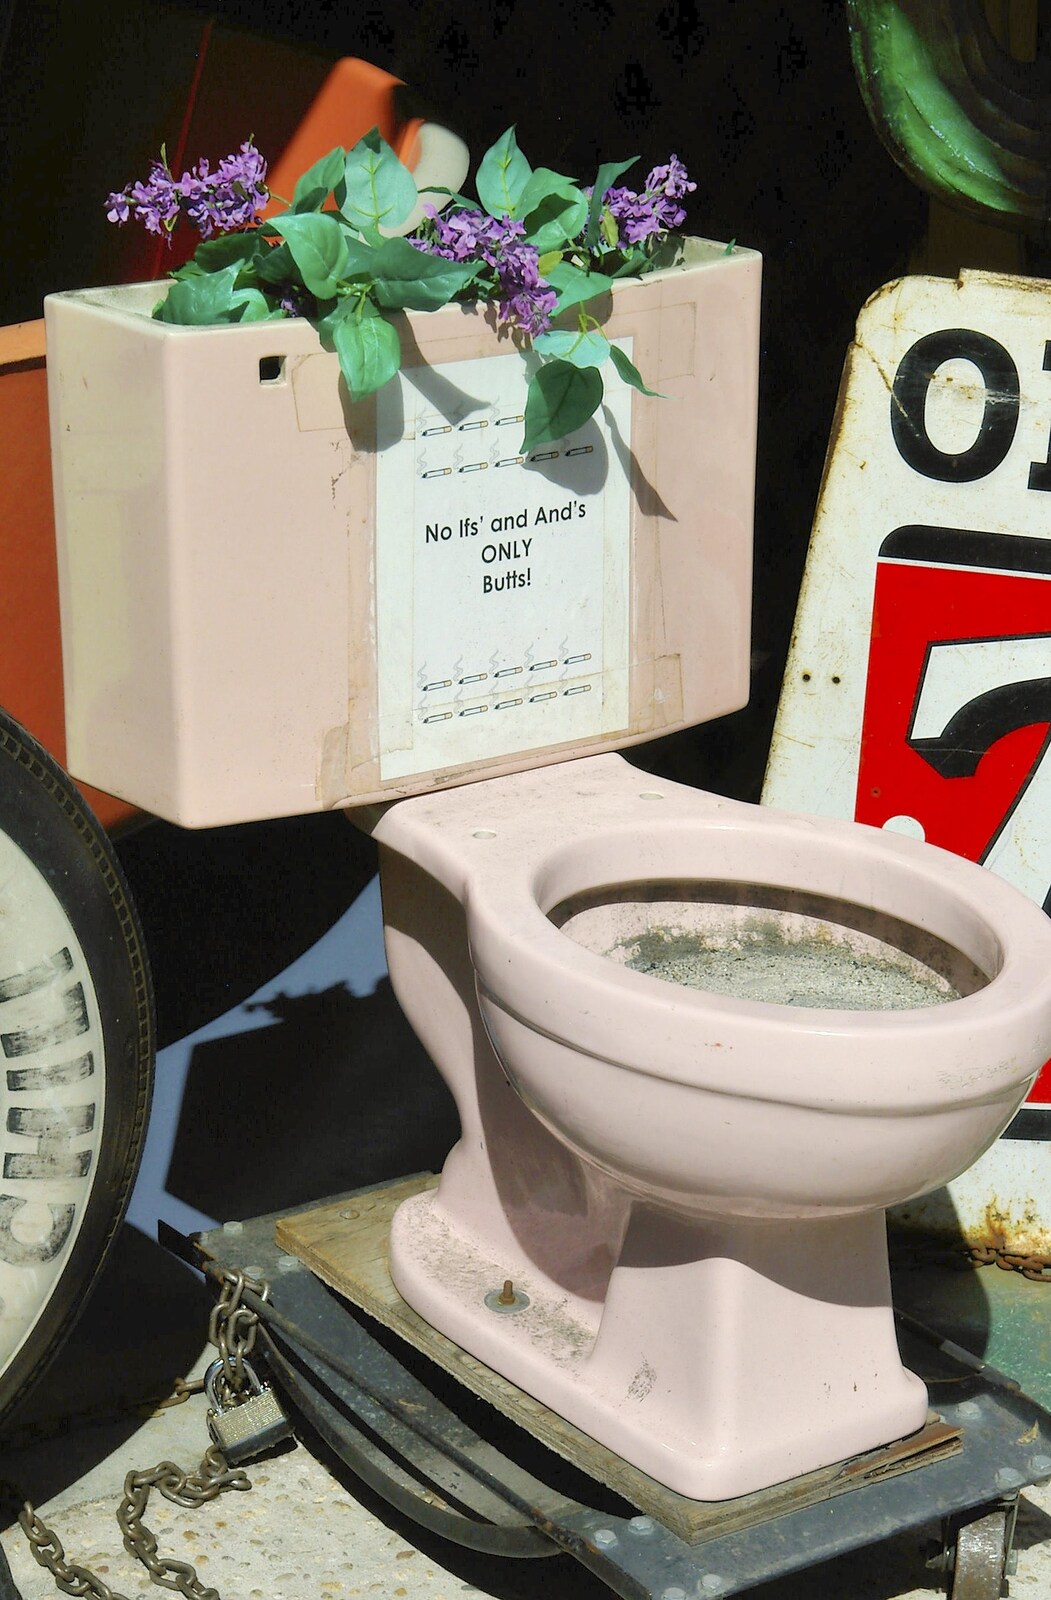 A porcelain toilet, used as a giant ash-tray from Times Square, the Empire State and Ground Zero, New York, US - 1st May 2006